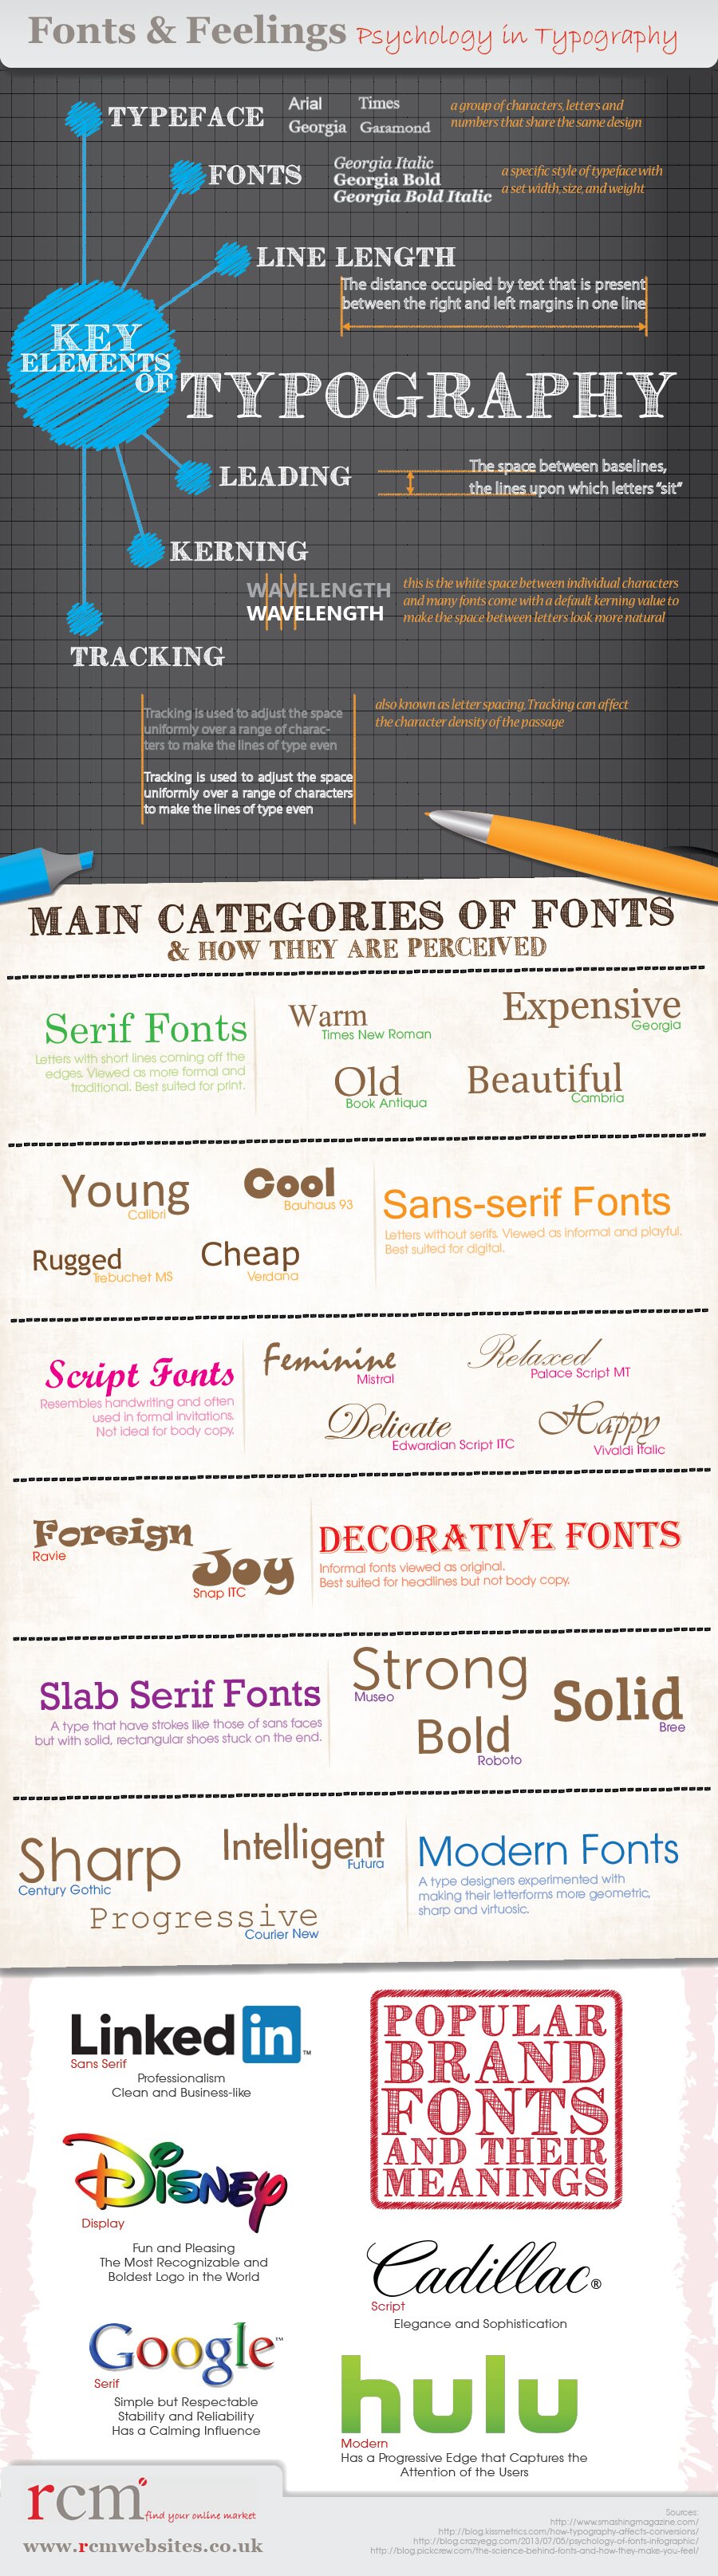 Fonts and Feelings Psychology in Typography